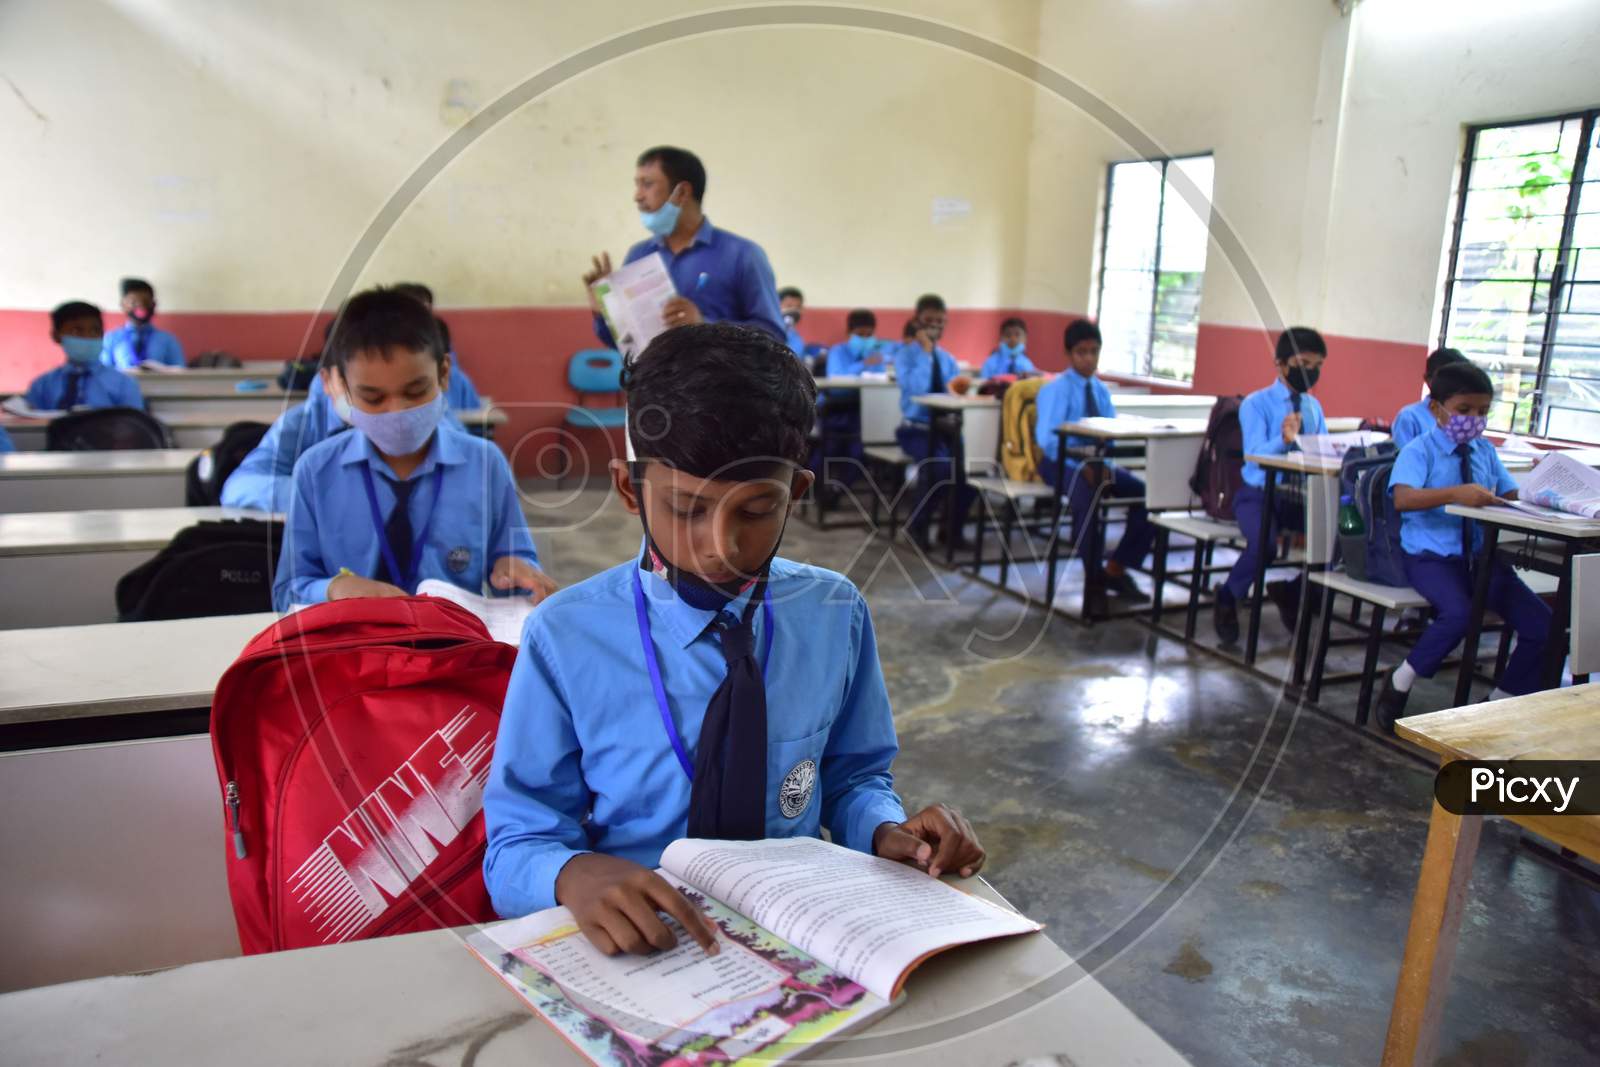 Students attend a class at a  School after schools re-opened following a gap of more then seven months due to coronavirus pandemic in Nagaon District of Assam on Nov 2,2020.